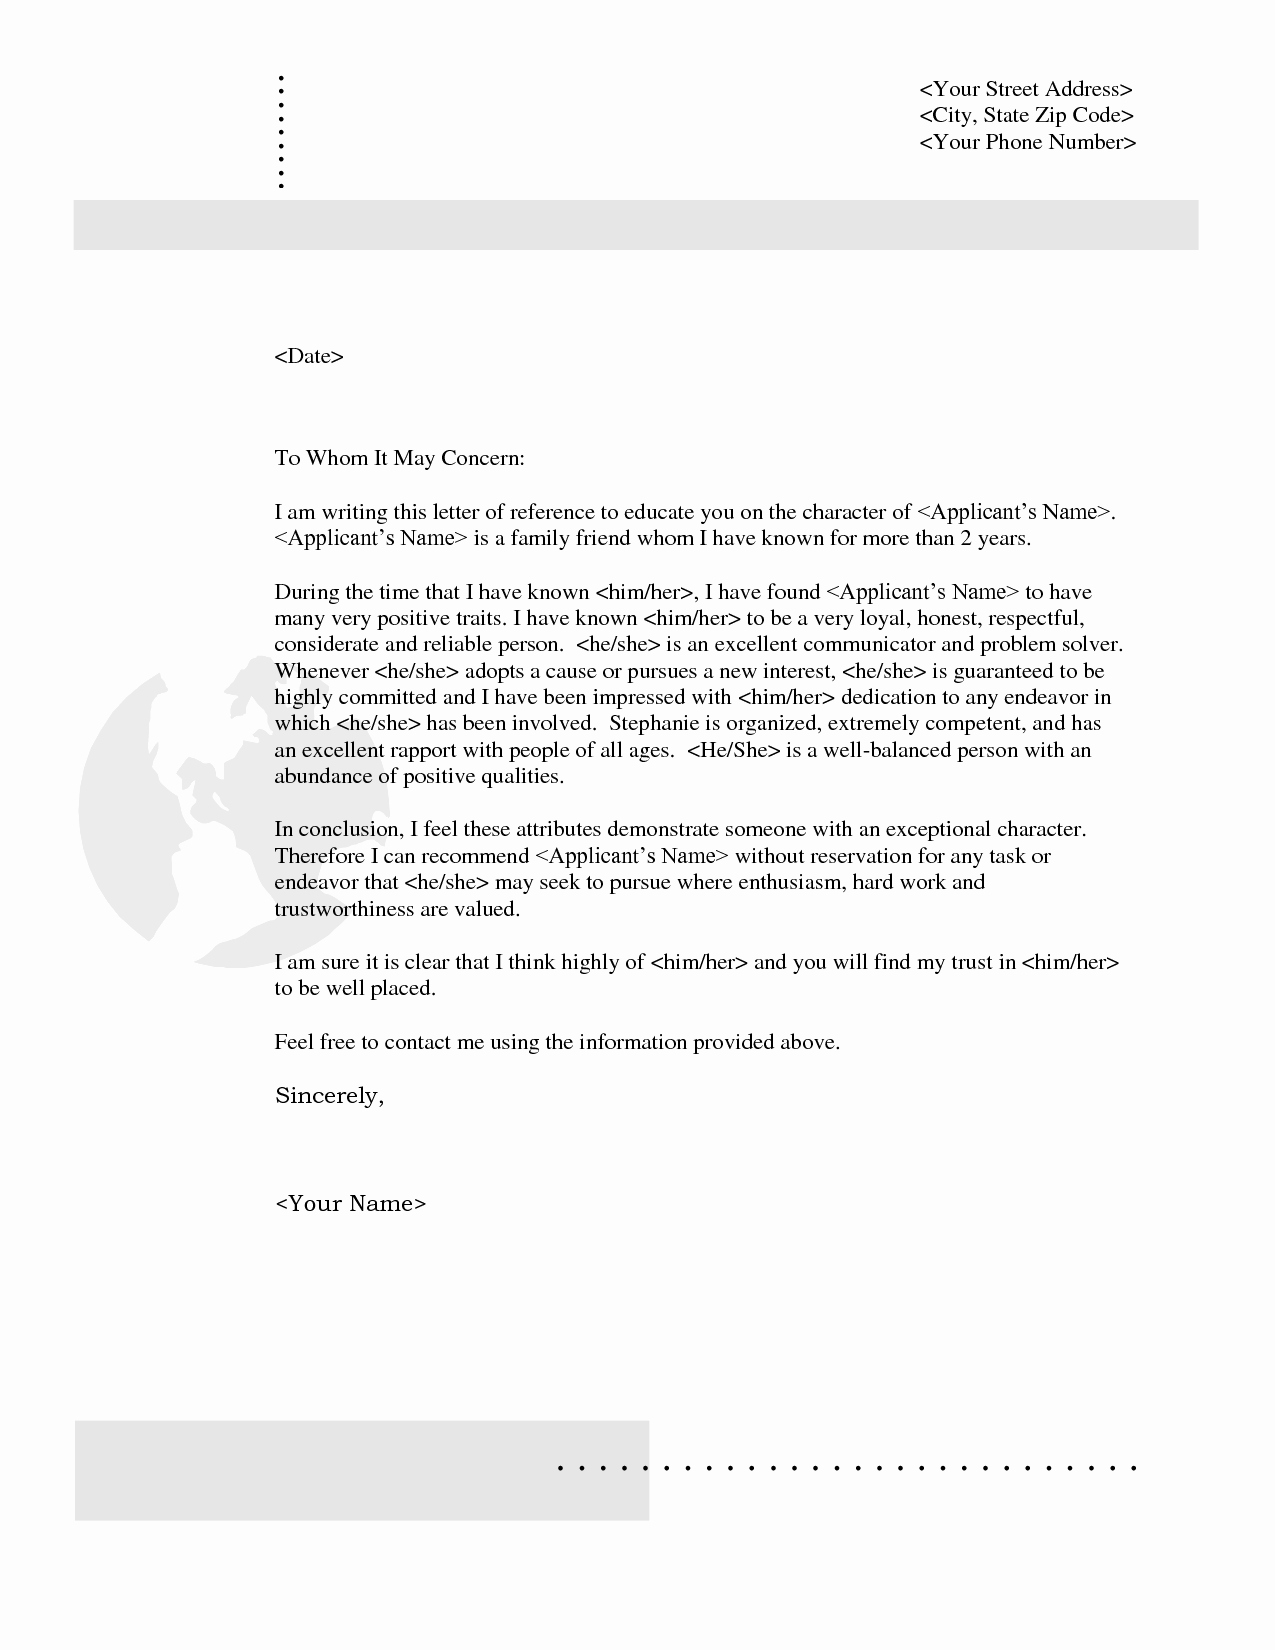 Letter Of Recommendation Letterhead Awesome Character Reference Letter Yahoo Image Search Results